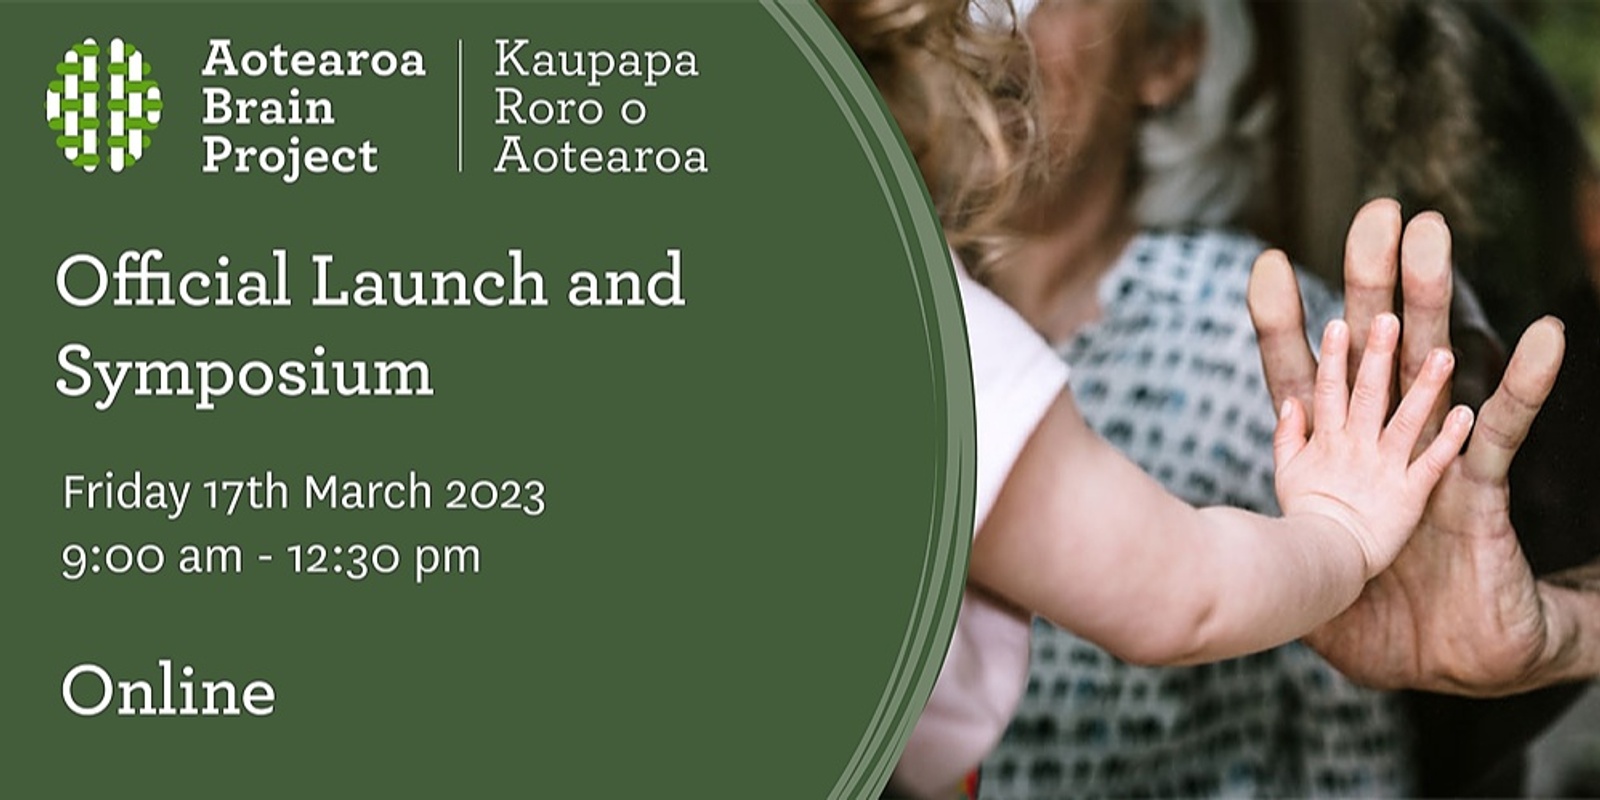 Banner image for Online: Launch and Symposium for Aotearoa Brain Project - Kaupapa Roro o Aotearoa 